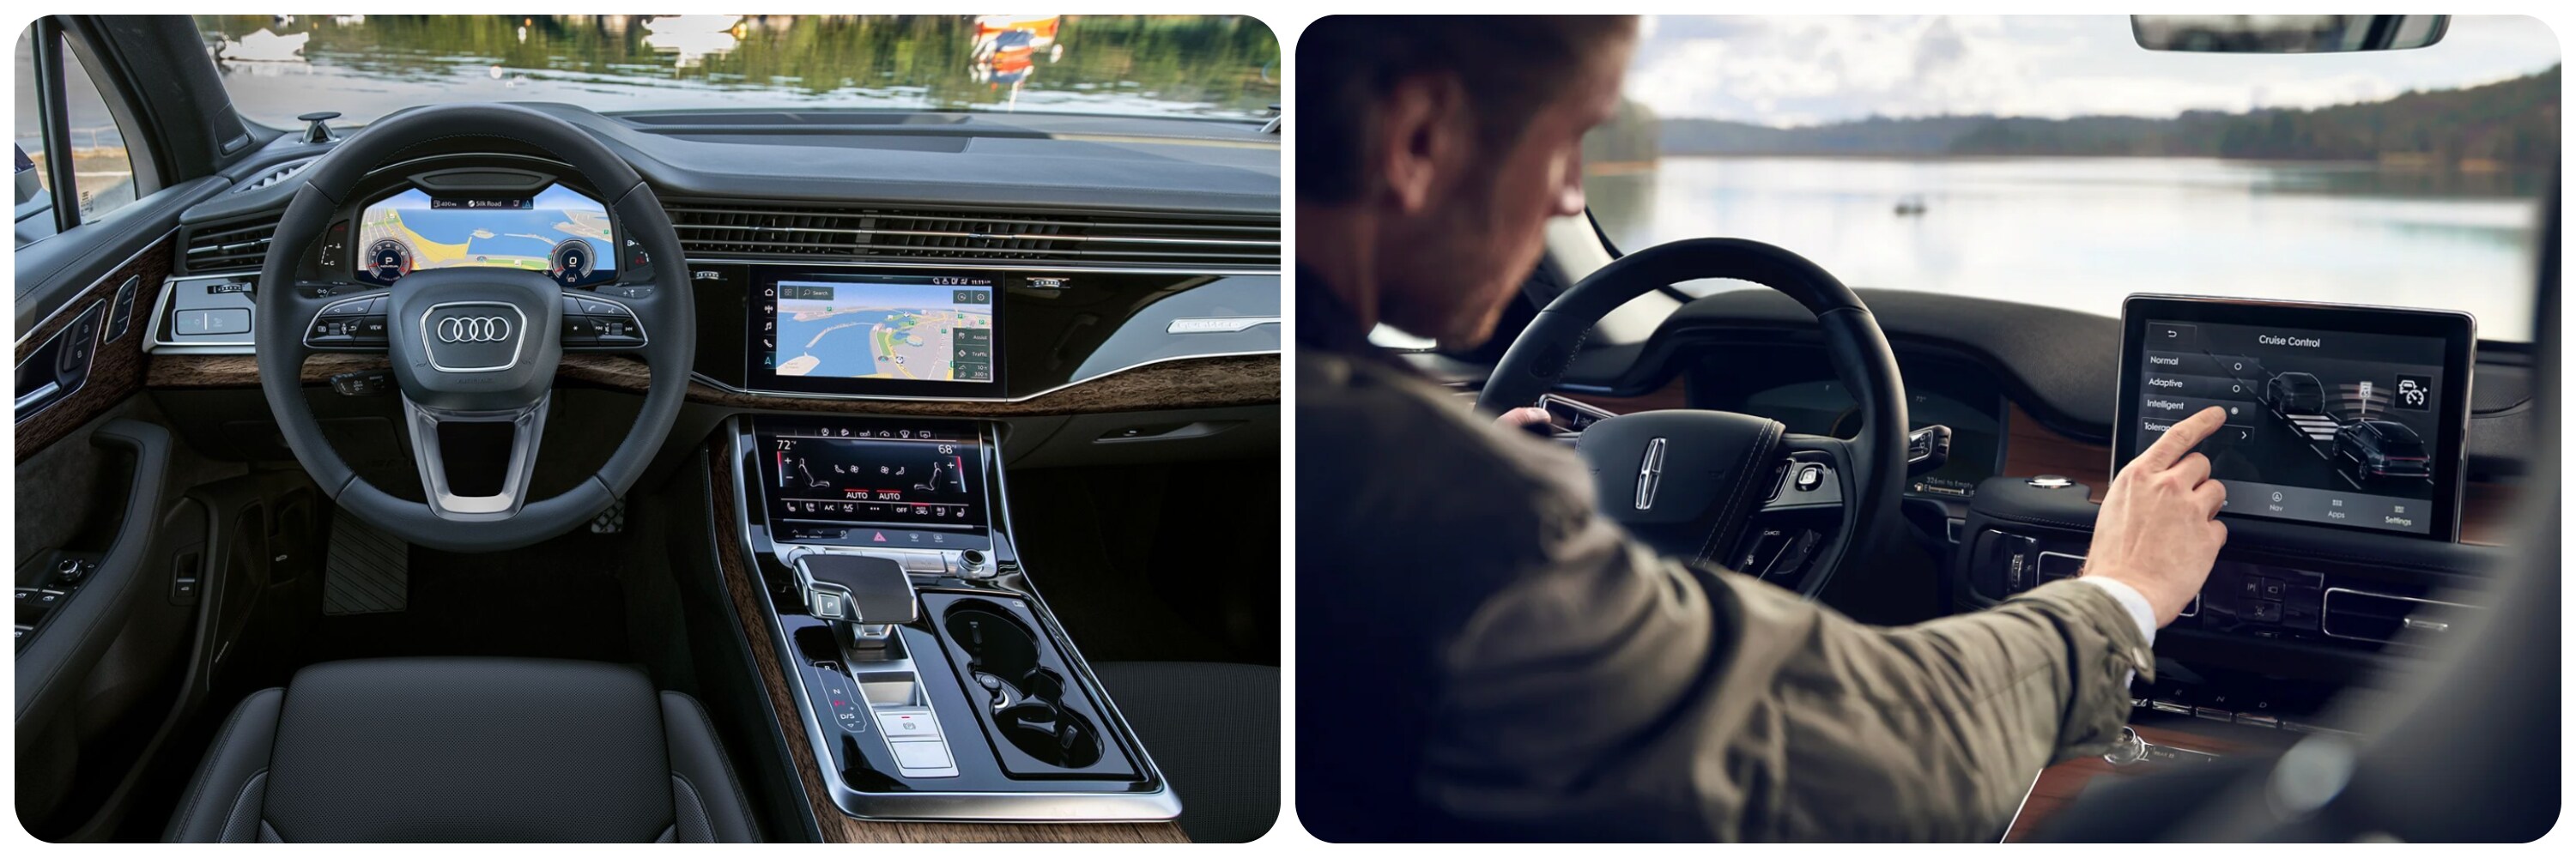 On the left a veiw of the digital dash and center console with burled woodgrain accents in the Audi Q7.  On the right, a man uses the touchscreen mounted to the top of the dash in a 2022 Lincoln Aviator